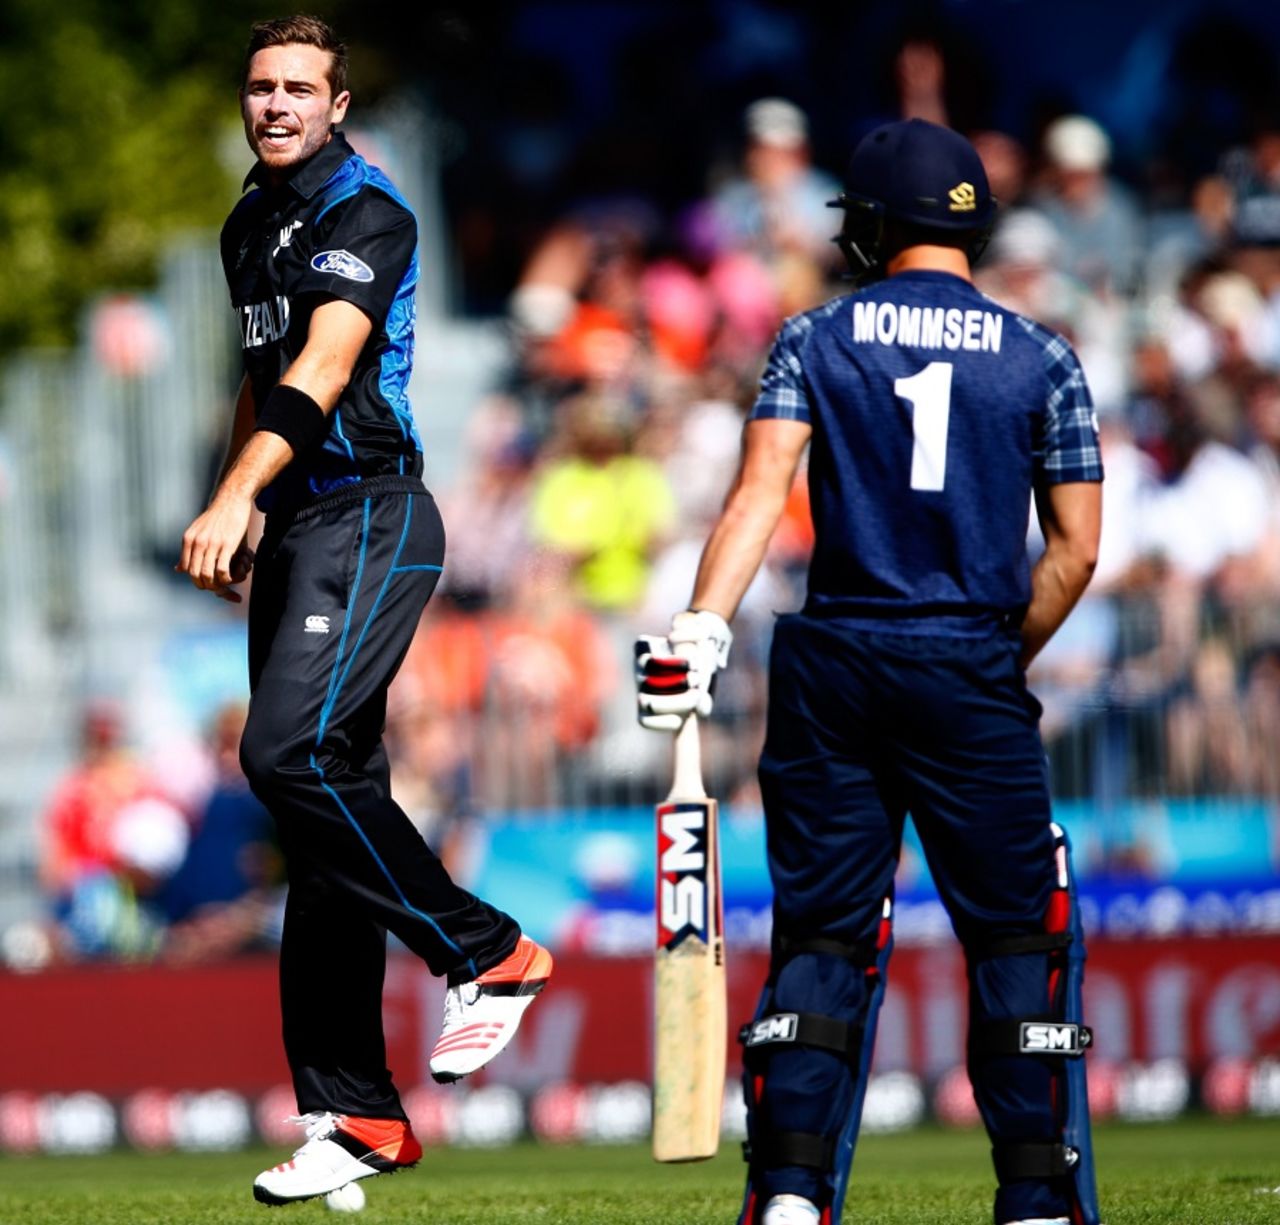 Tim Southee exults after trapping Preston Mommsen lbw for a golden duck, New Zealand v Scotland, World Cup 2015, Group A, Dunedin, February 17, 2015